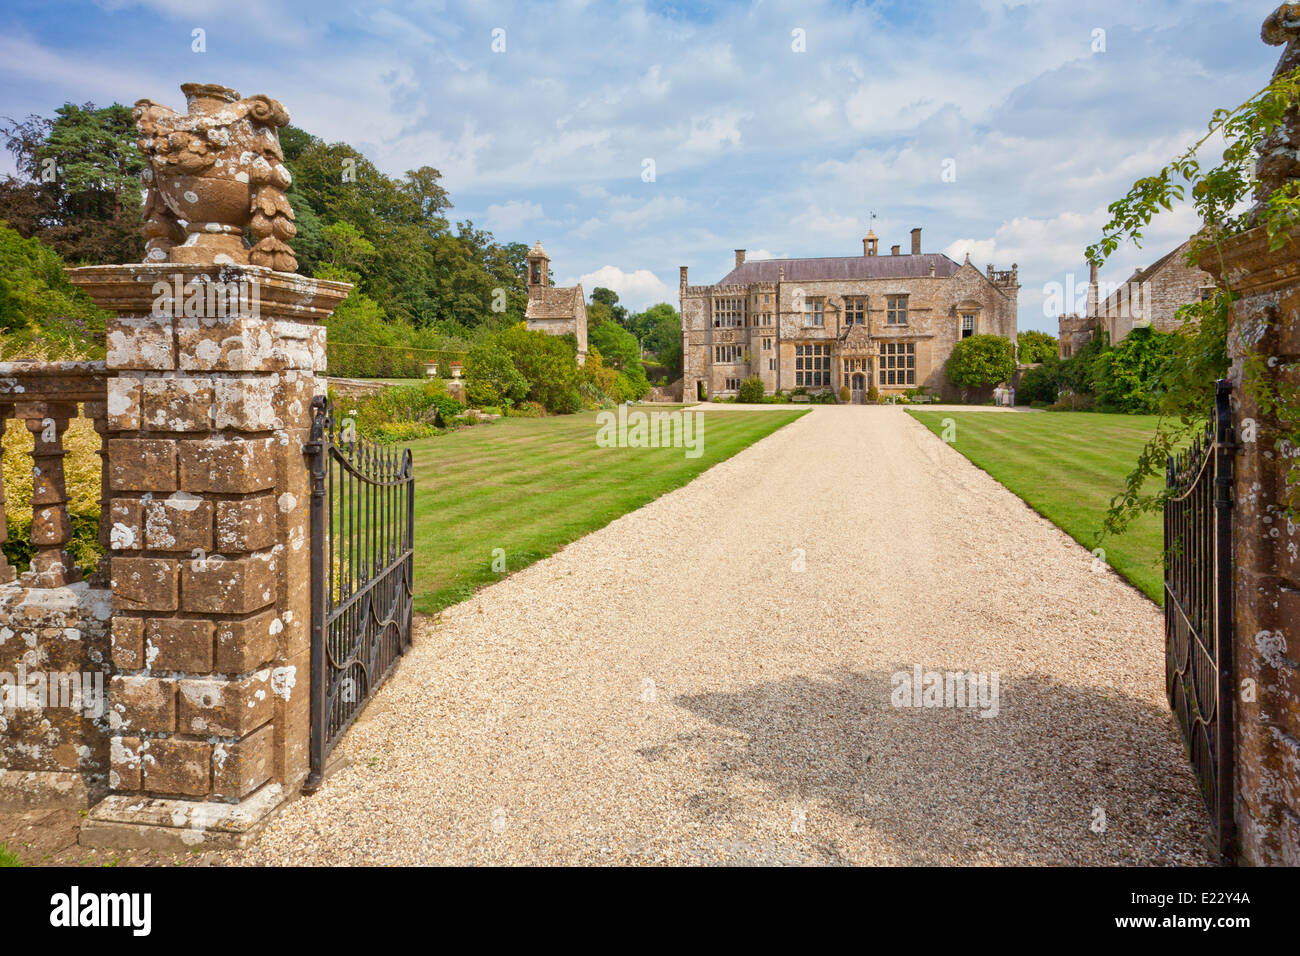 The west front and driveway at Brympton d'Evercy House nr Yeovil, Somerset, England, UK Stock Photo